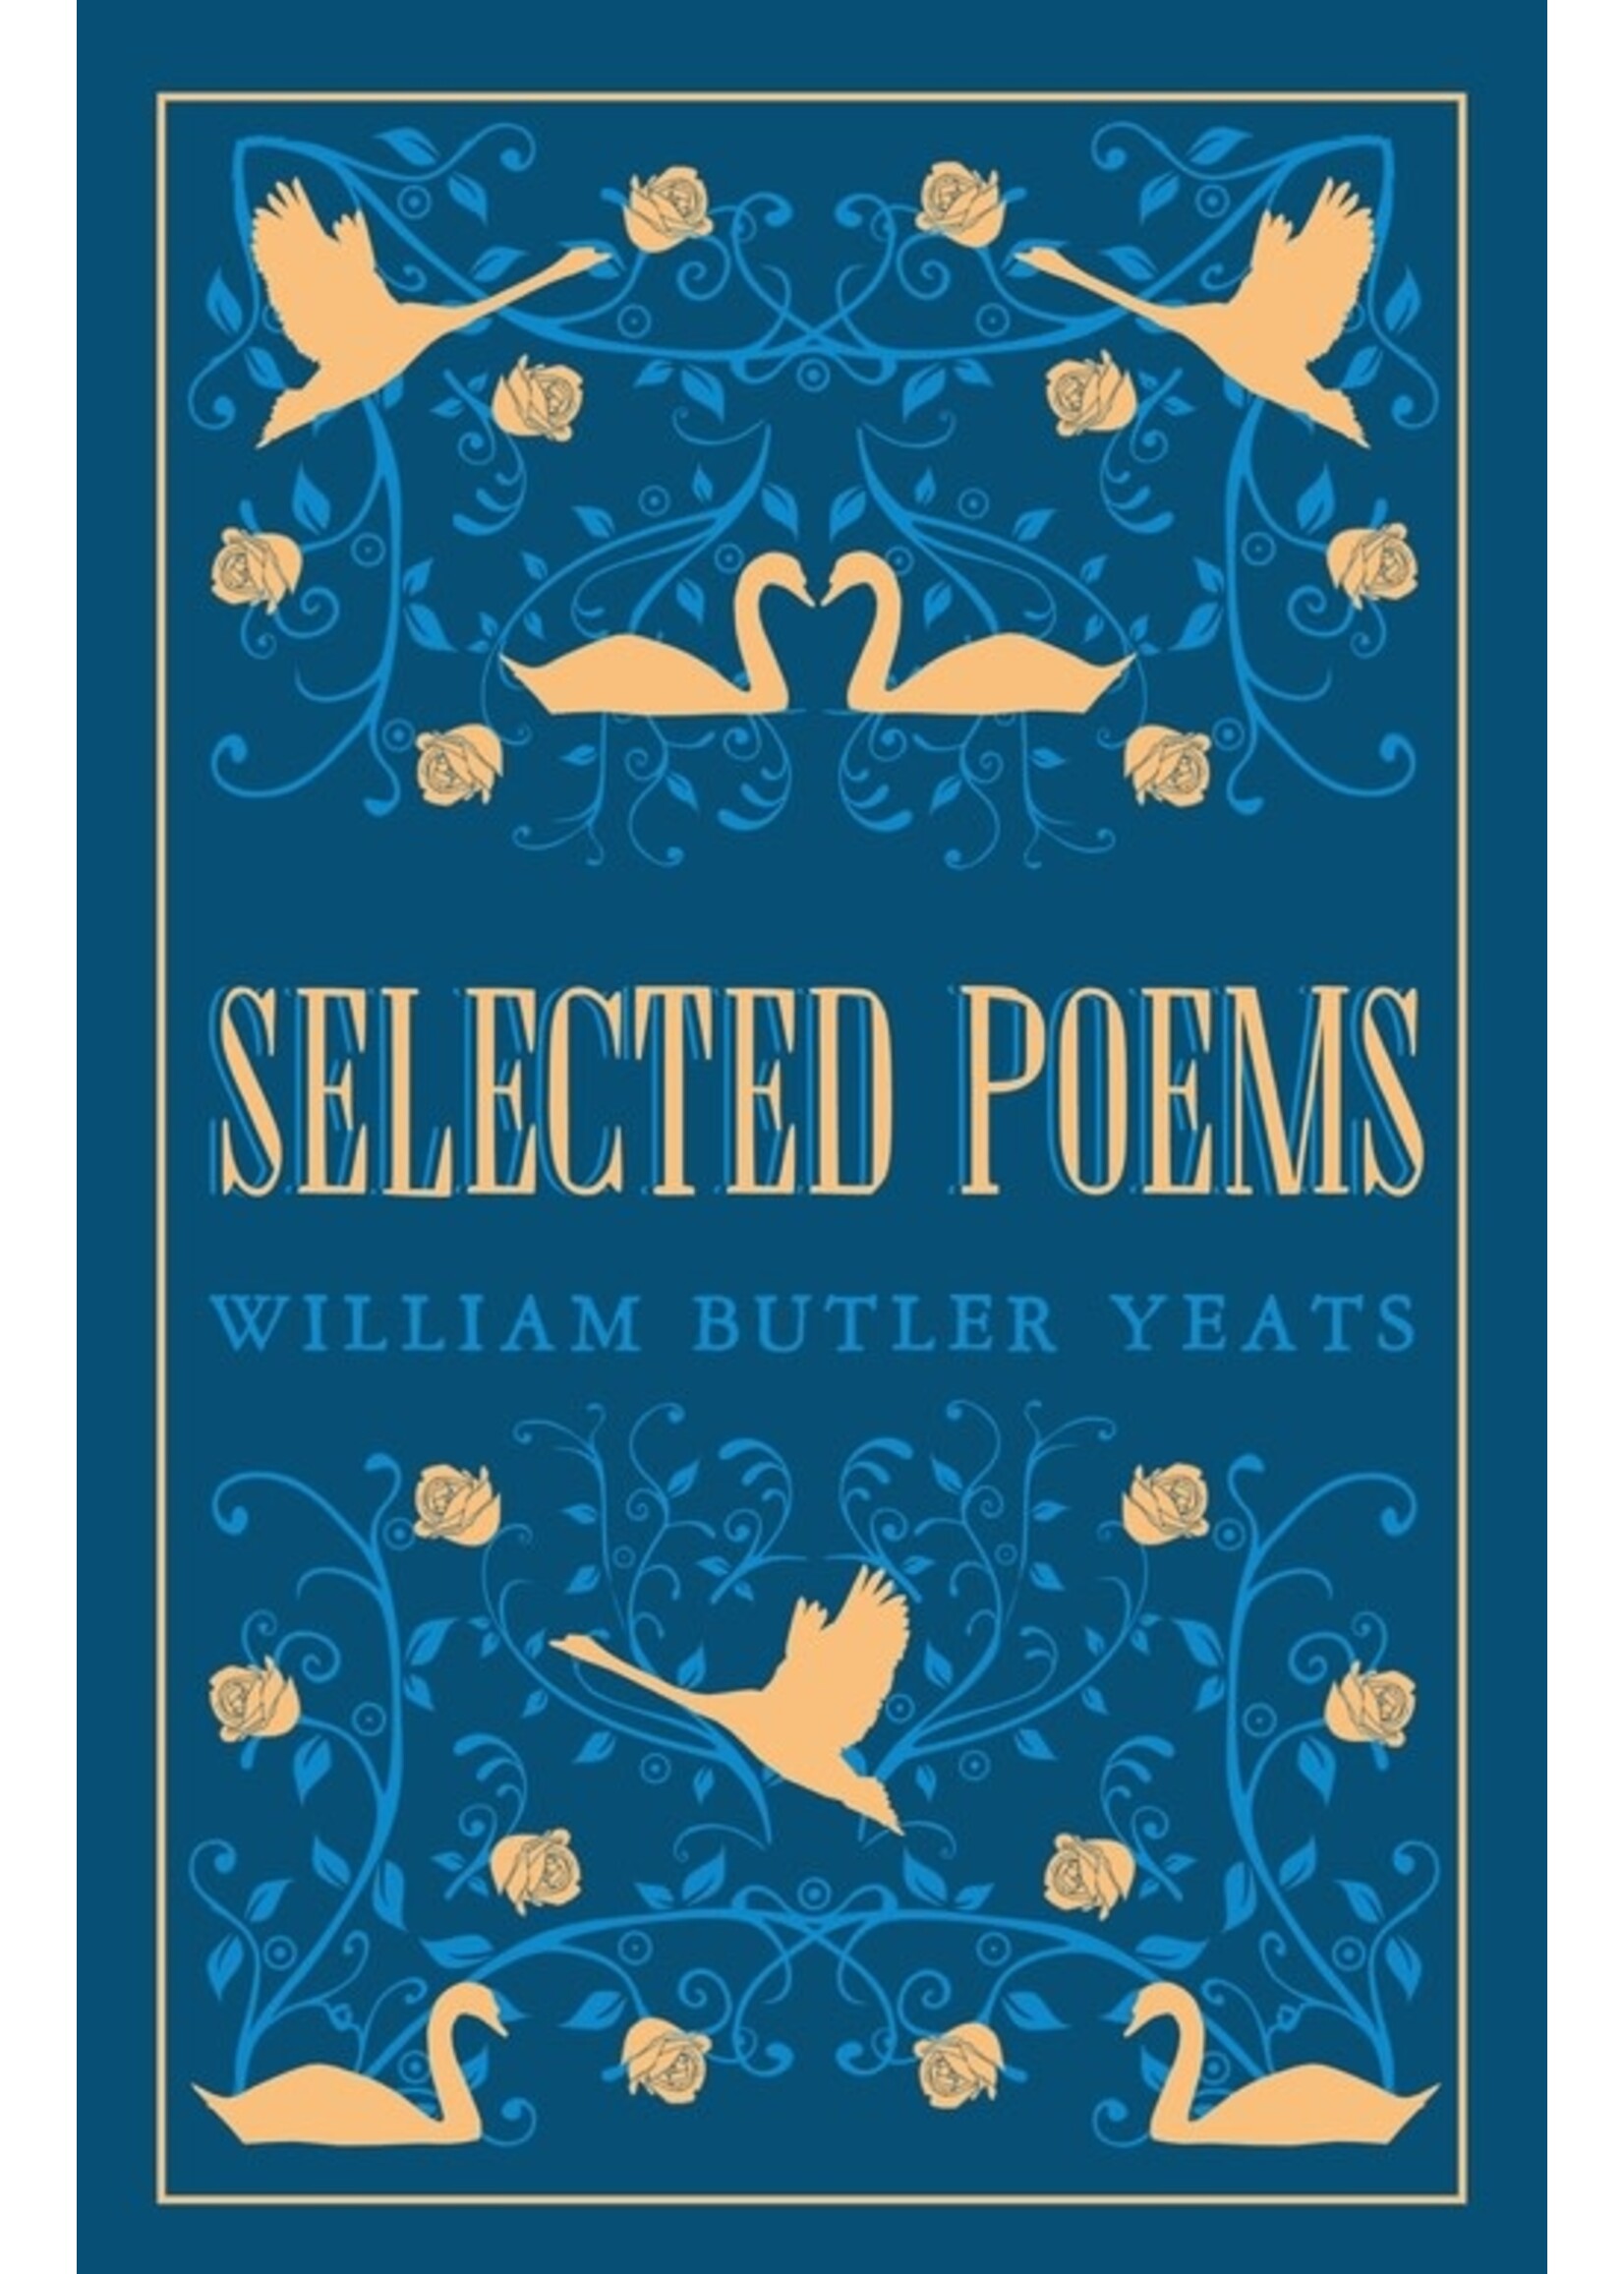 Selected Poems by W. B. Yeats